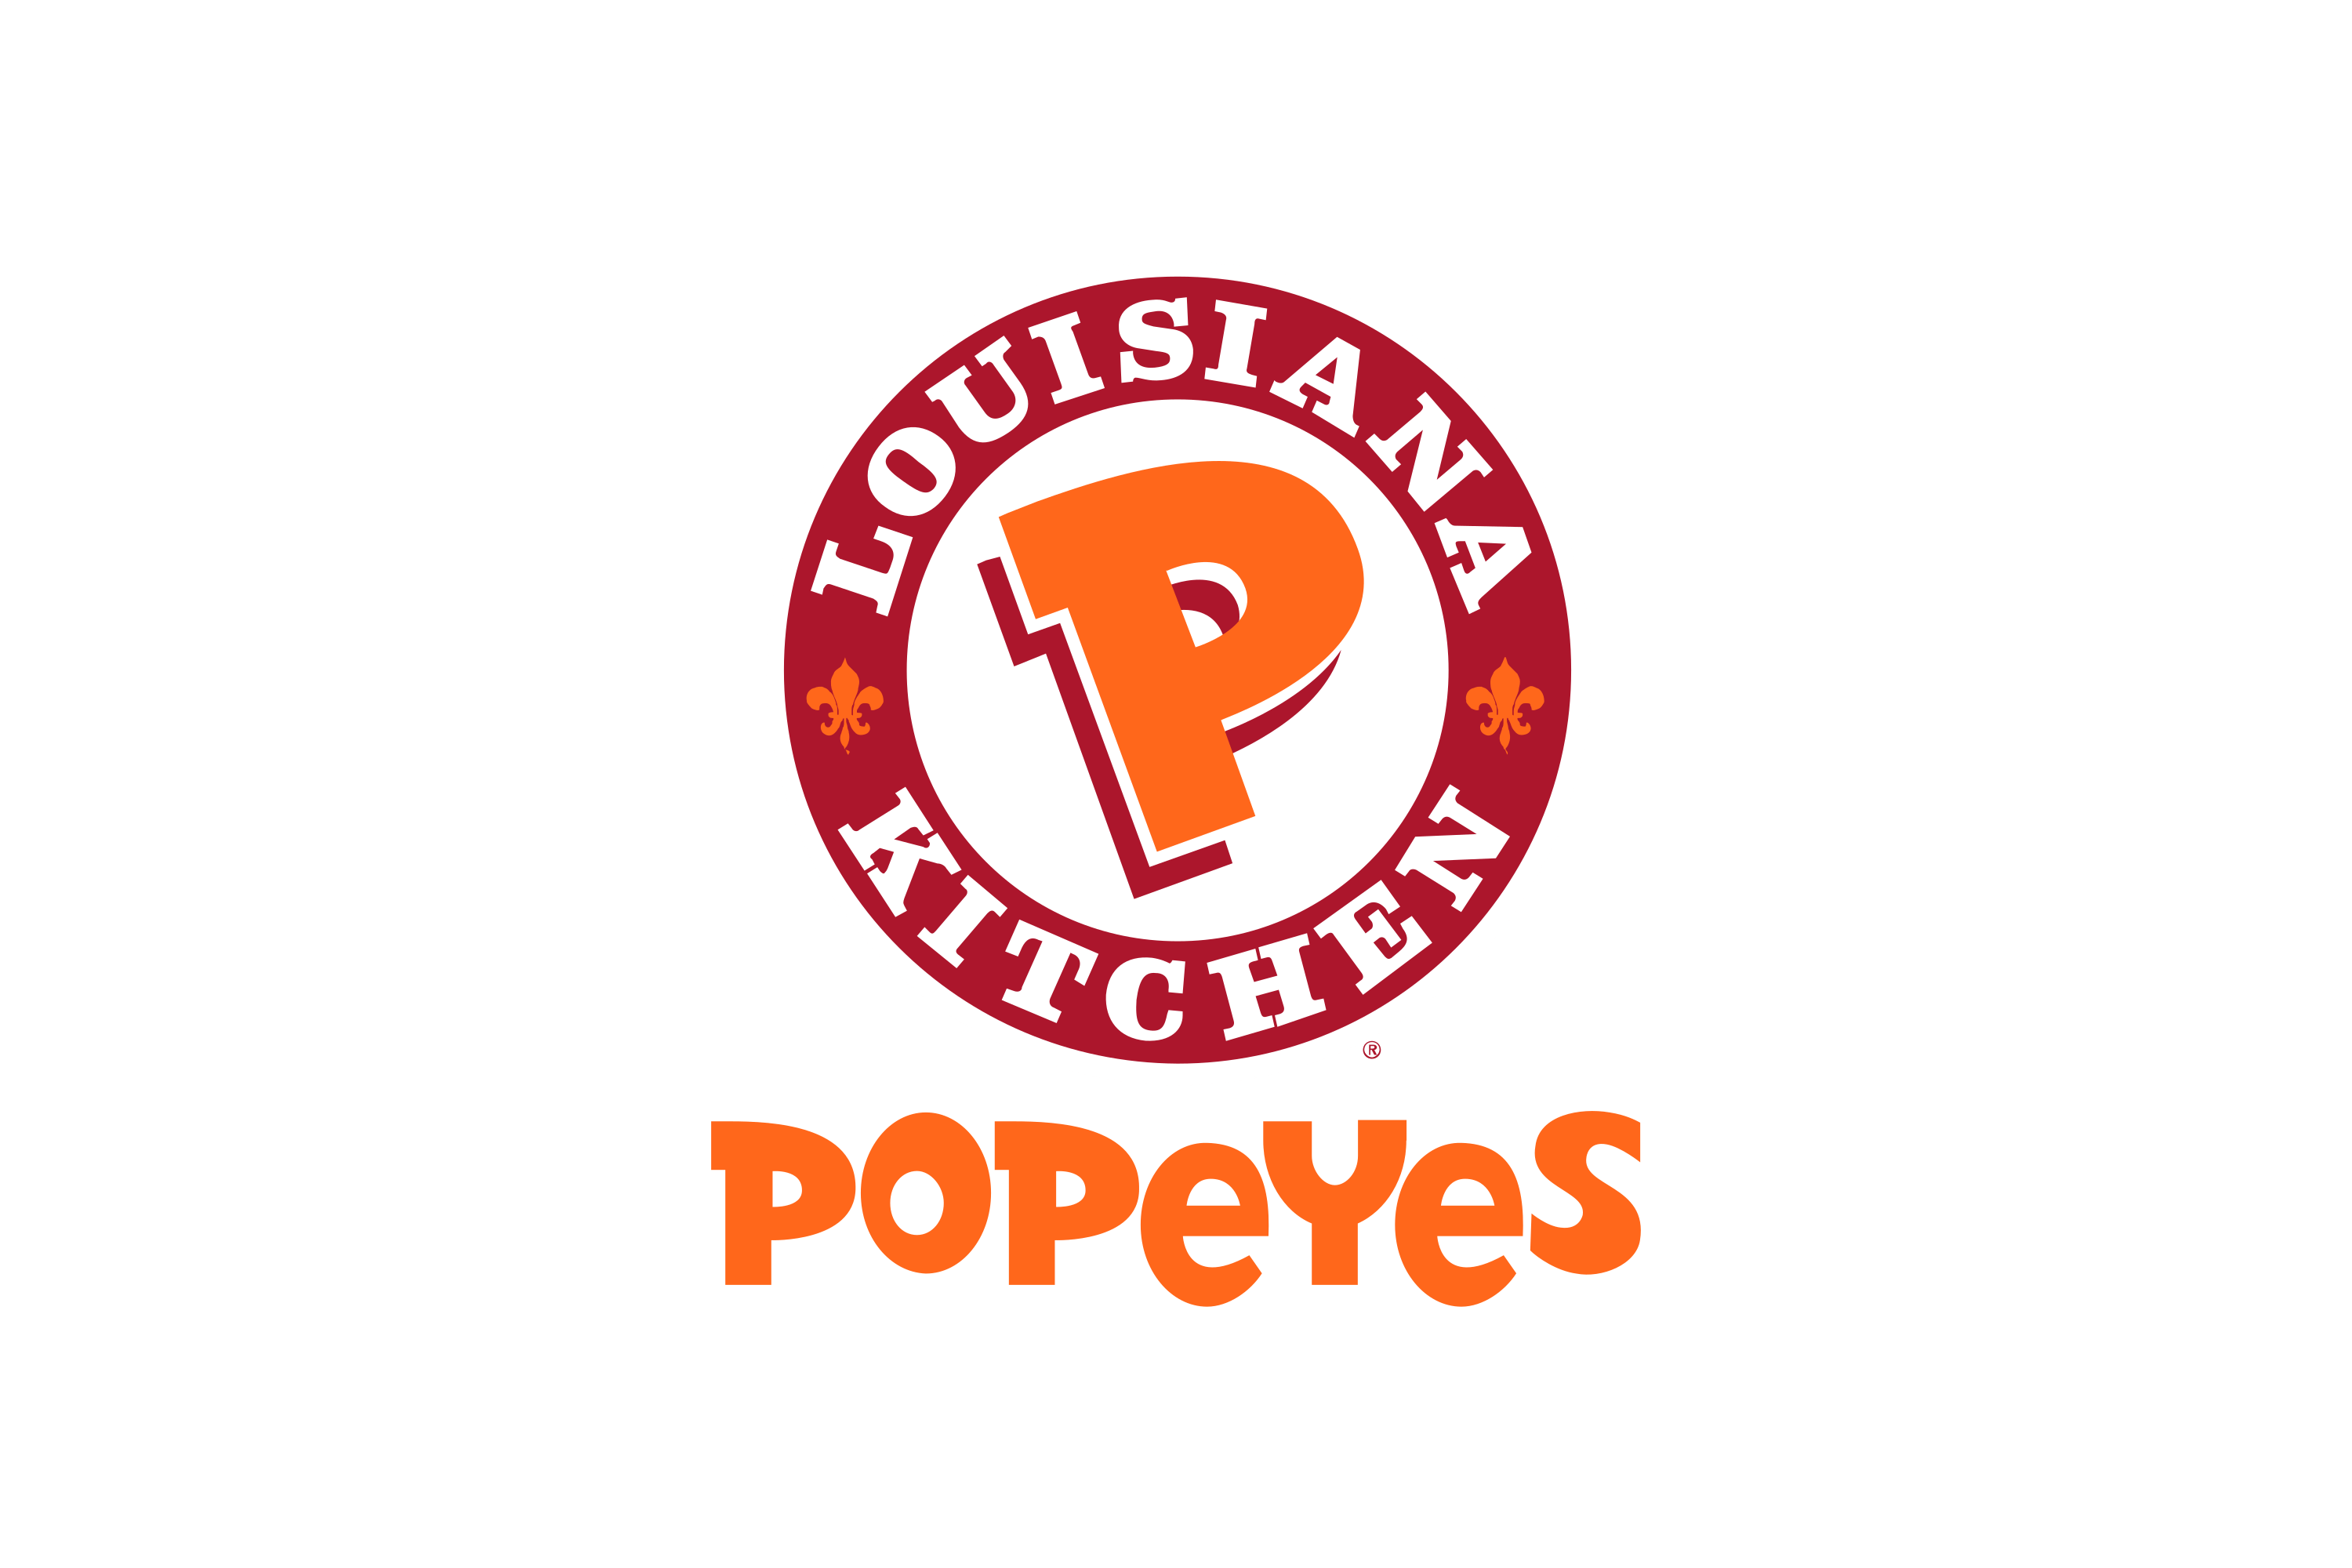 Download Popeyes Louisiana Kitchen Logo In Svg Vector Or Png File Format Logo Wine